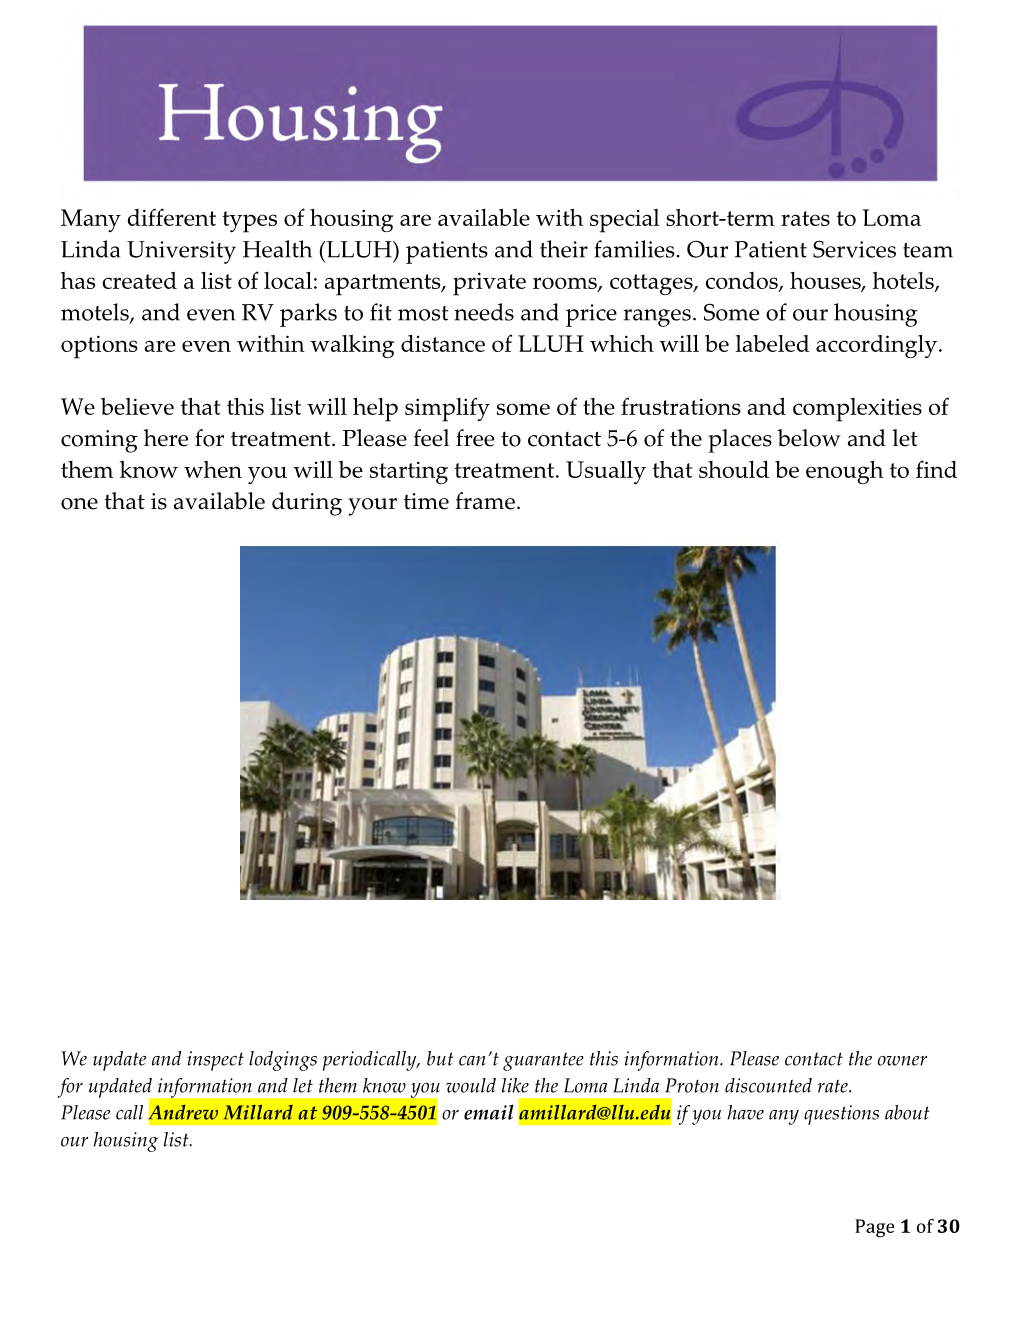 Many Different Types of Housing Are Available with Special Short-Term Rates to Loma Linda University Health (LLUH) Patients and Their Families